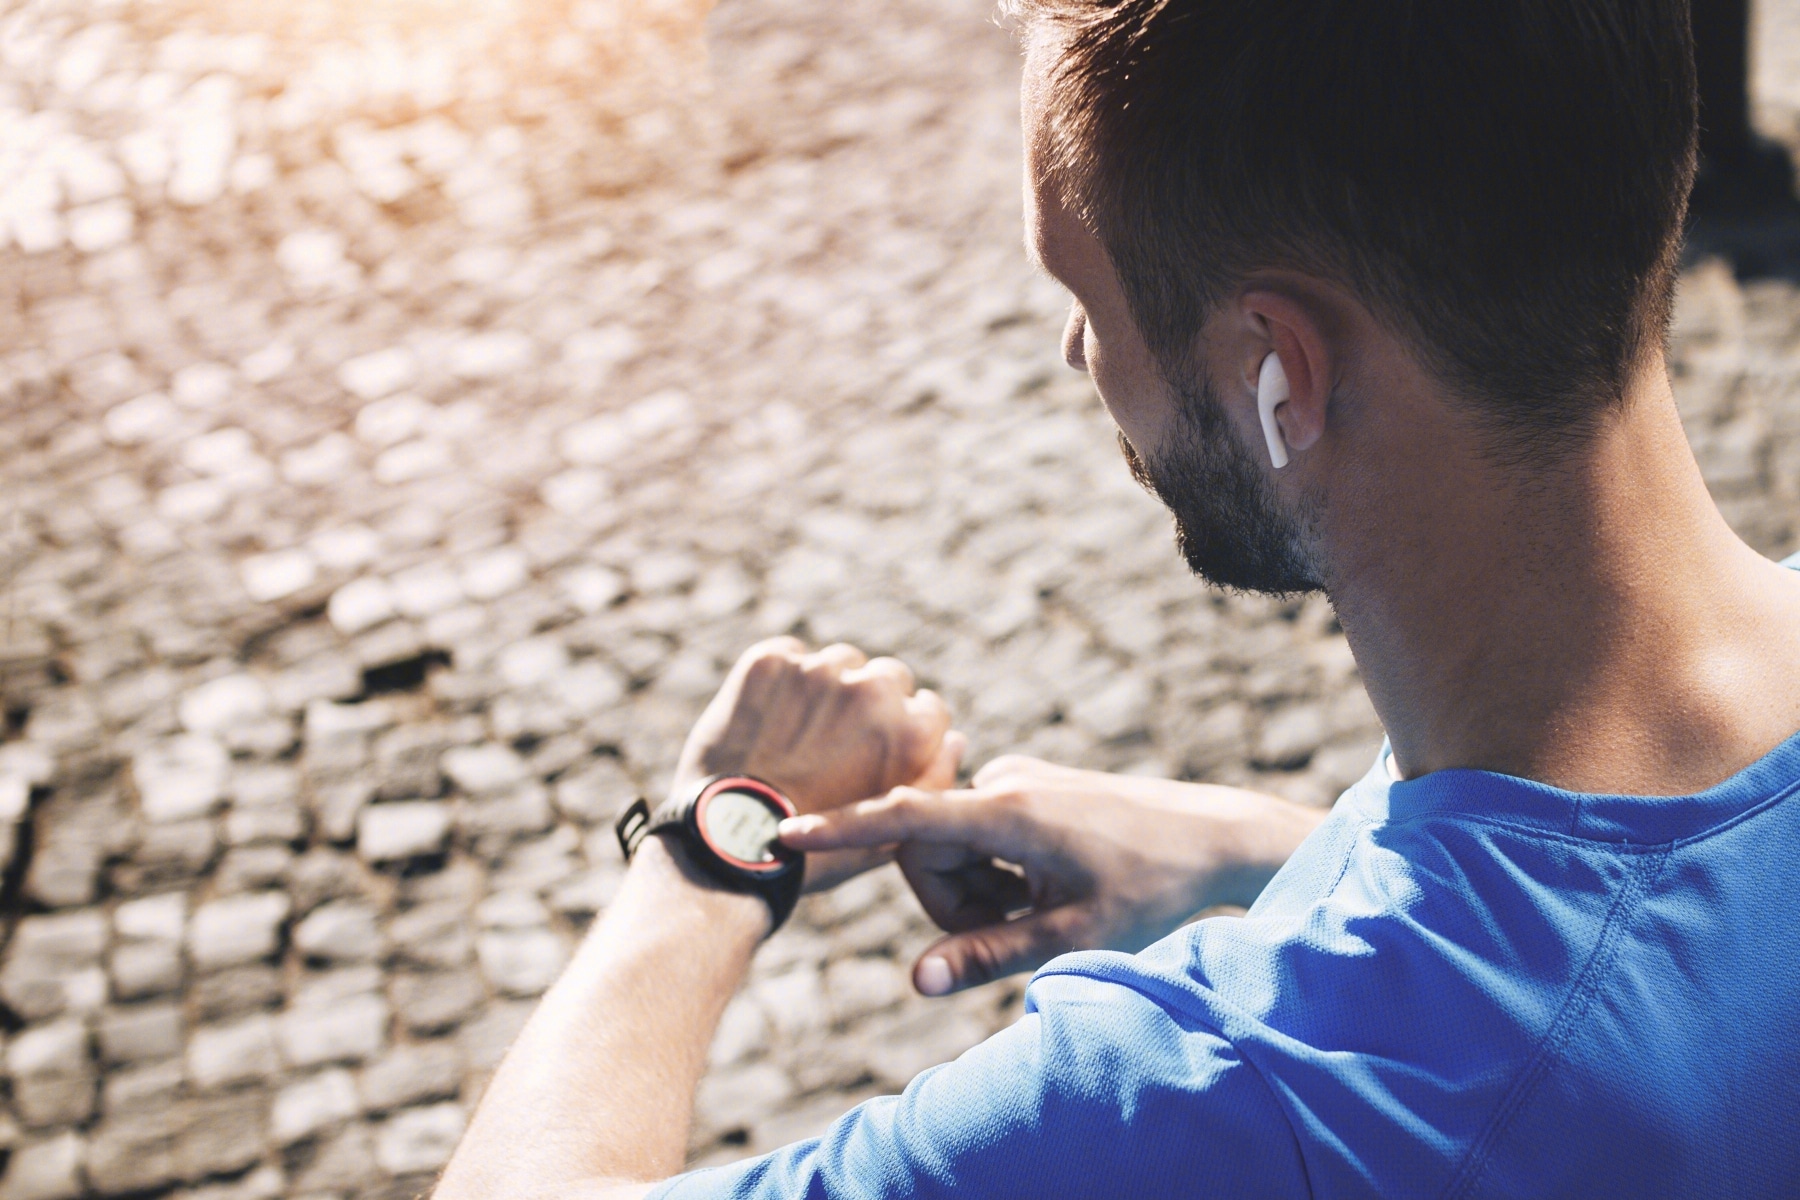 JD Sales Data Show Stronger Consumer Demand for Wearable Devices